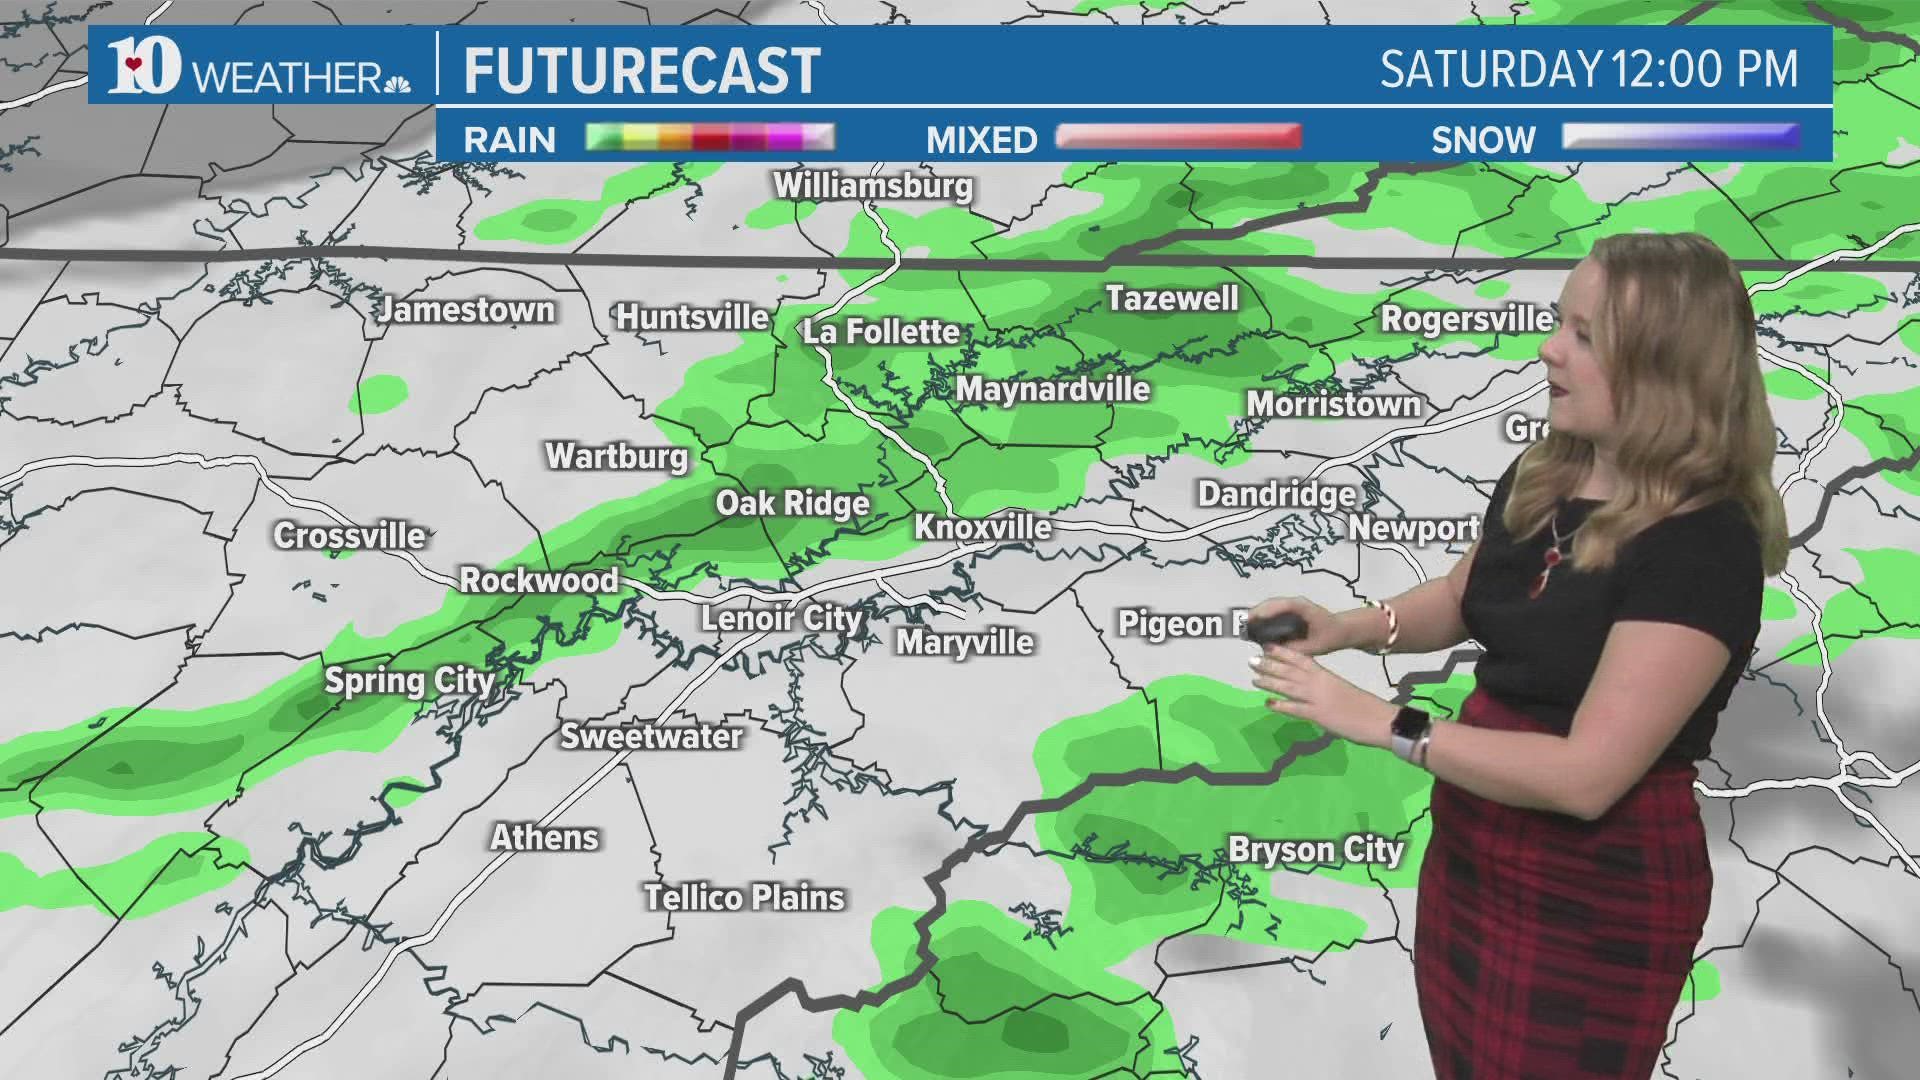 Scattered showers for this morning, drying out by the afternoon